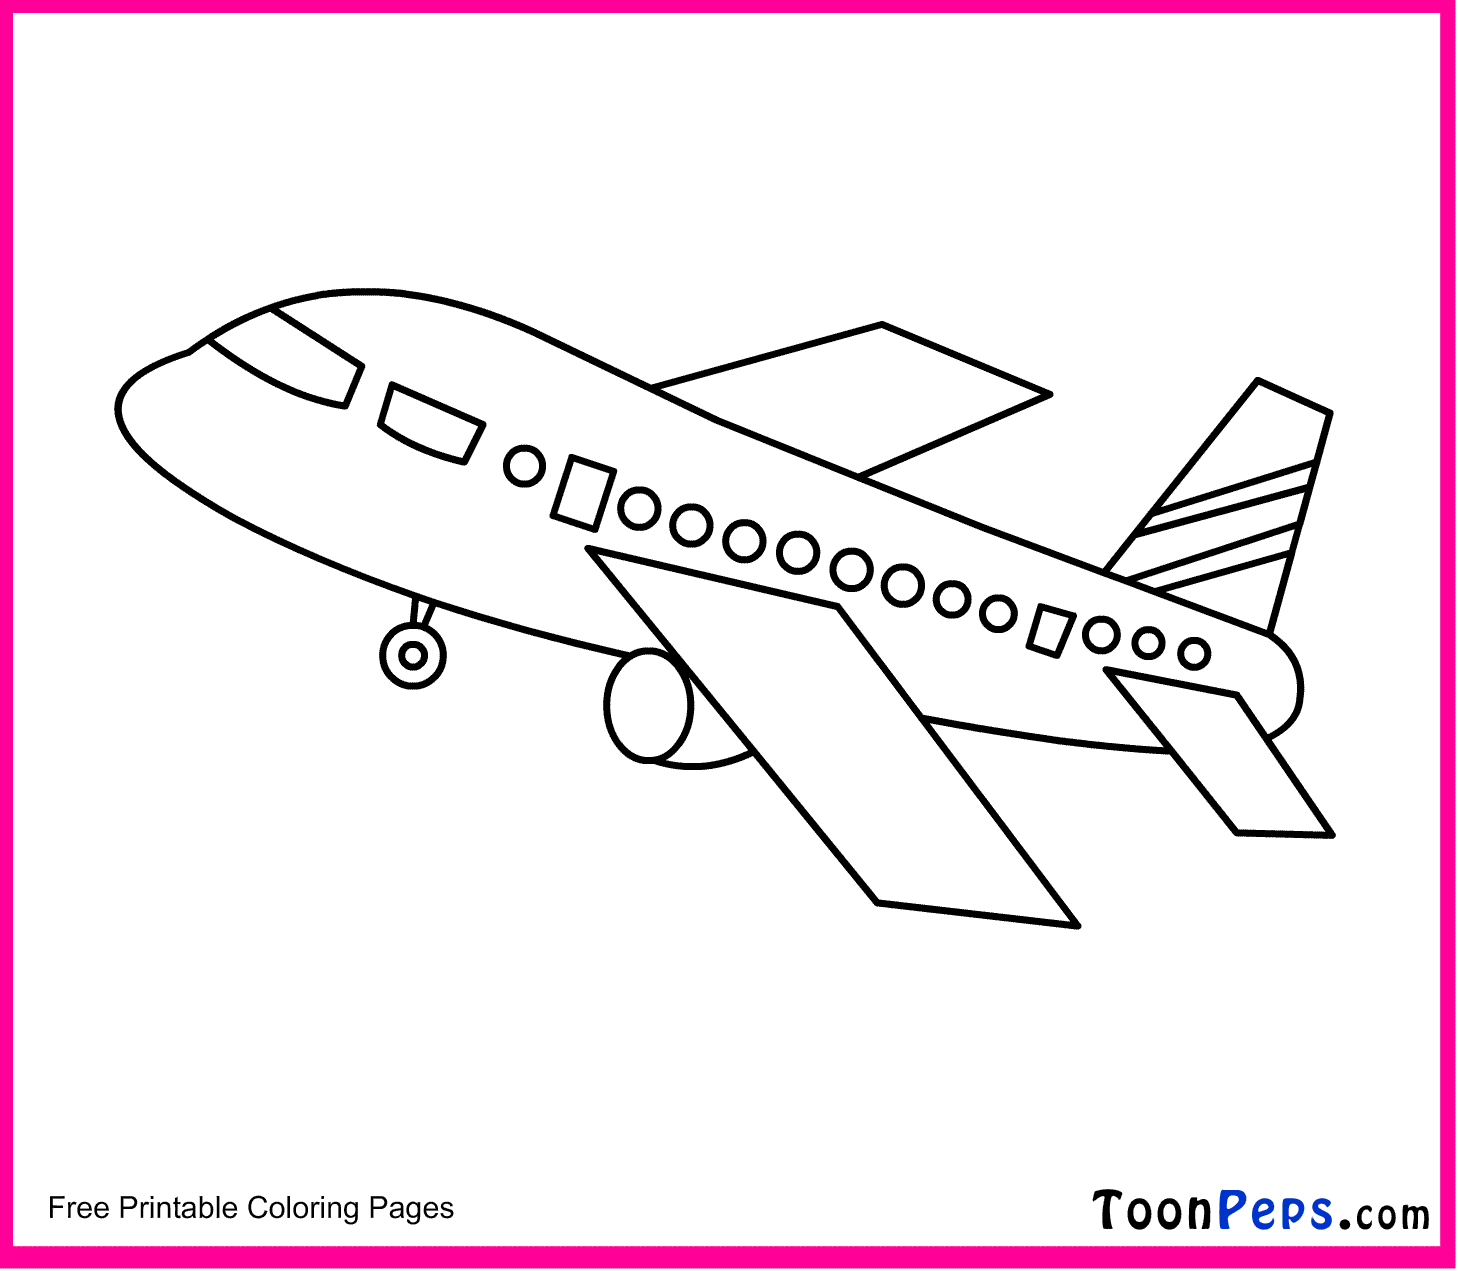 Free Airplane Drawing For Kids, Download Free Airplane Drawing For Kids